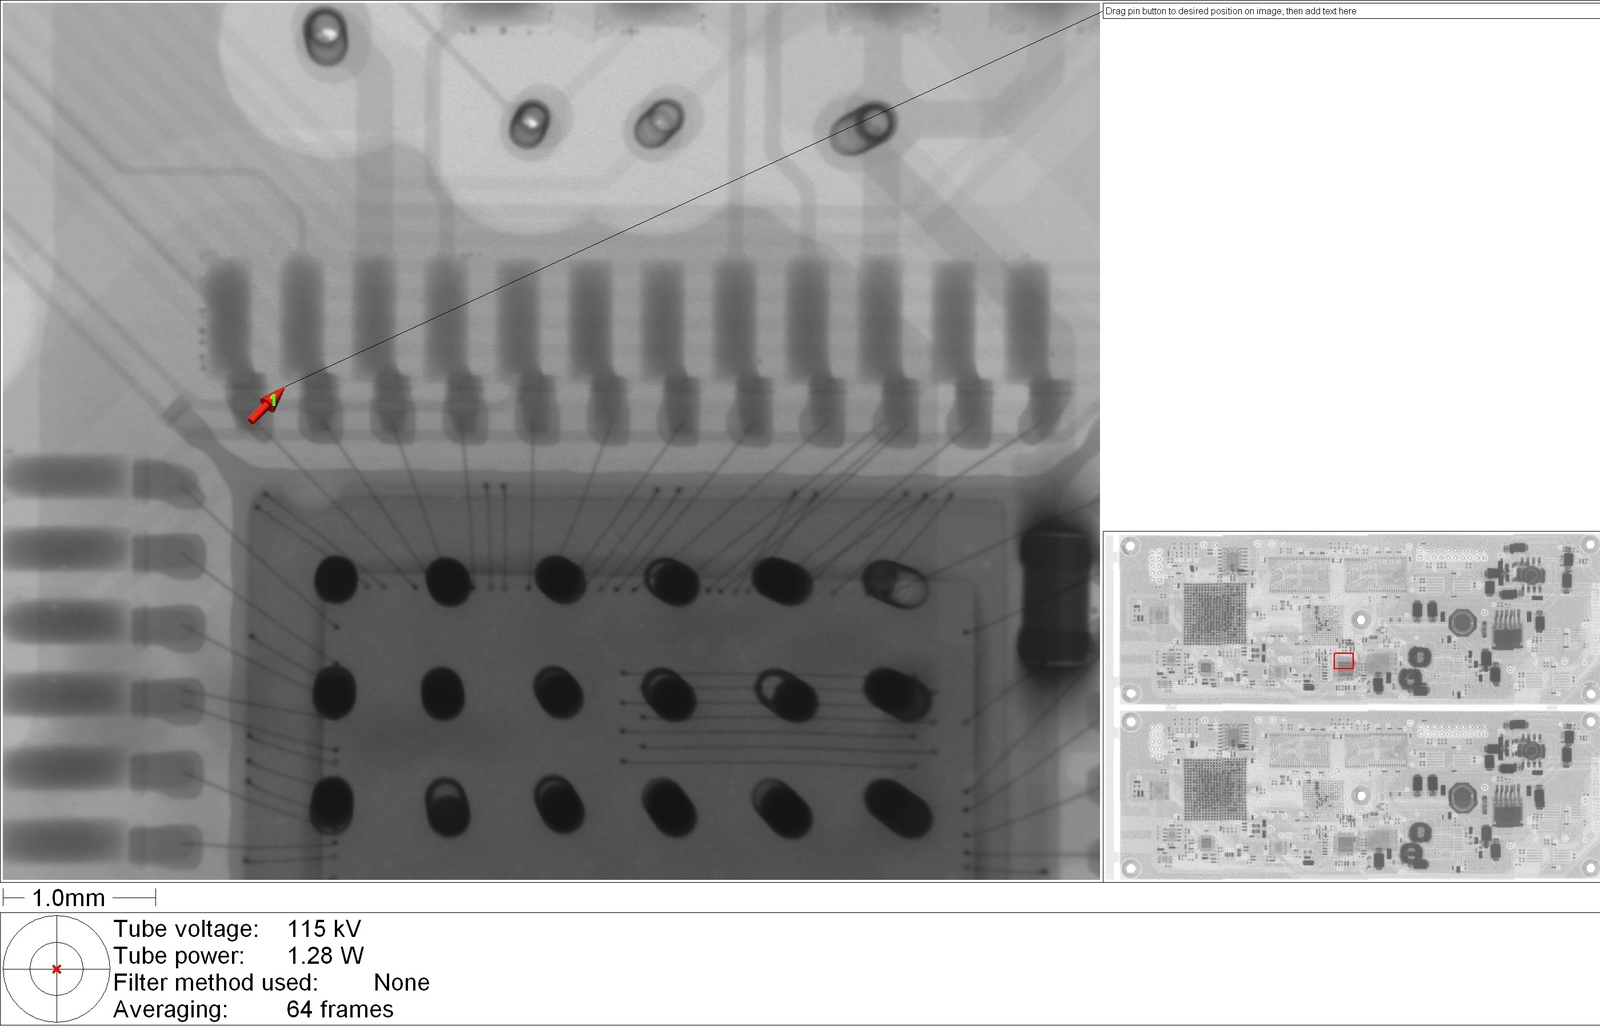 Defects in the soldering of microcircuits in BGA and QFN packages on x-rays. - My, X-ray, Bga, Soldering, Smd, Longpost, Defect, Smd-Technology